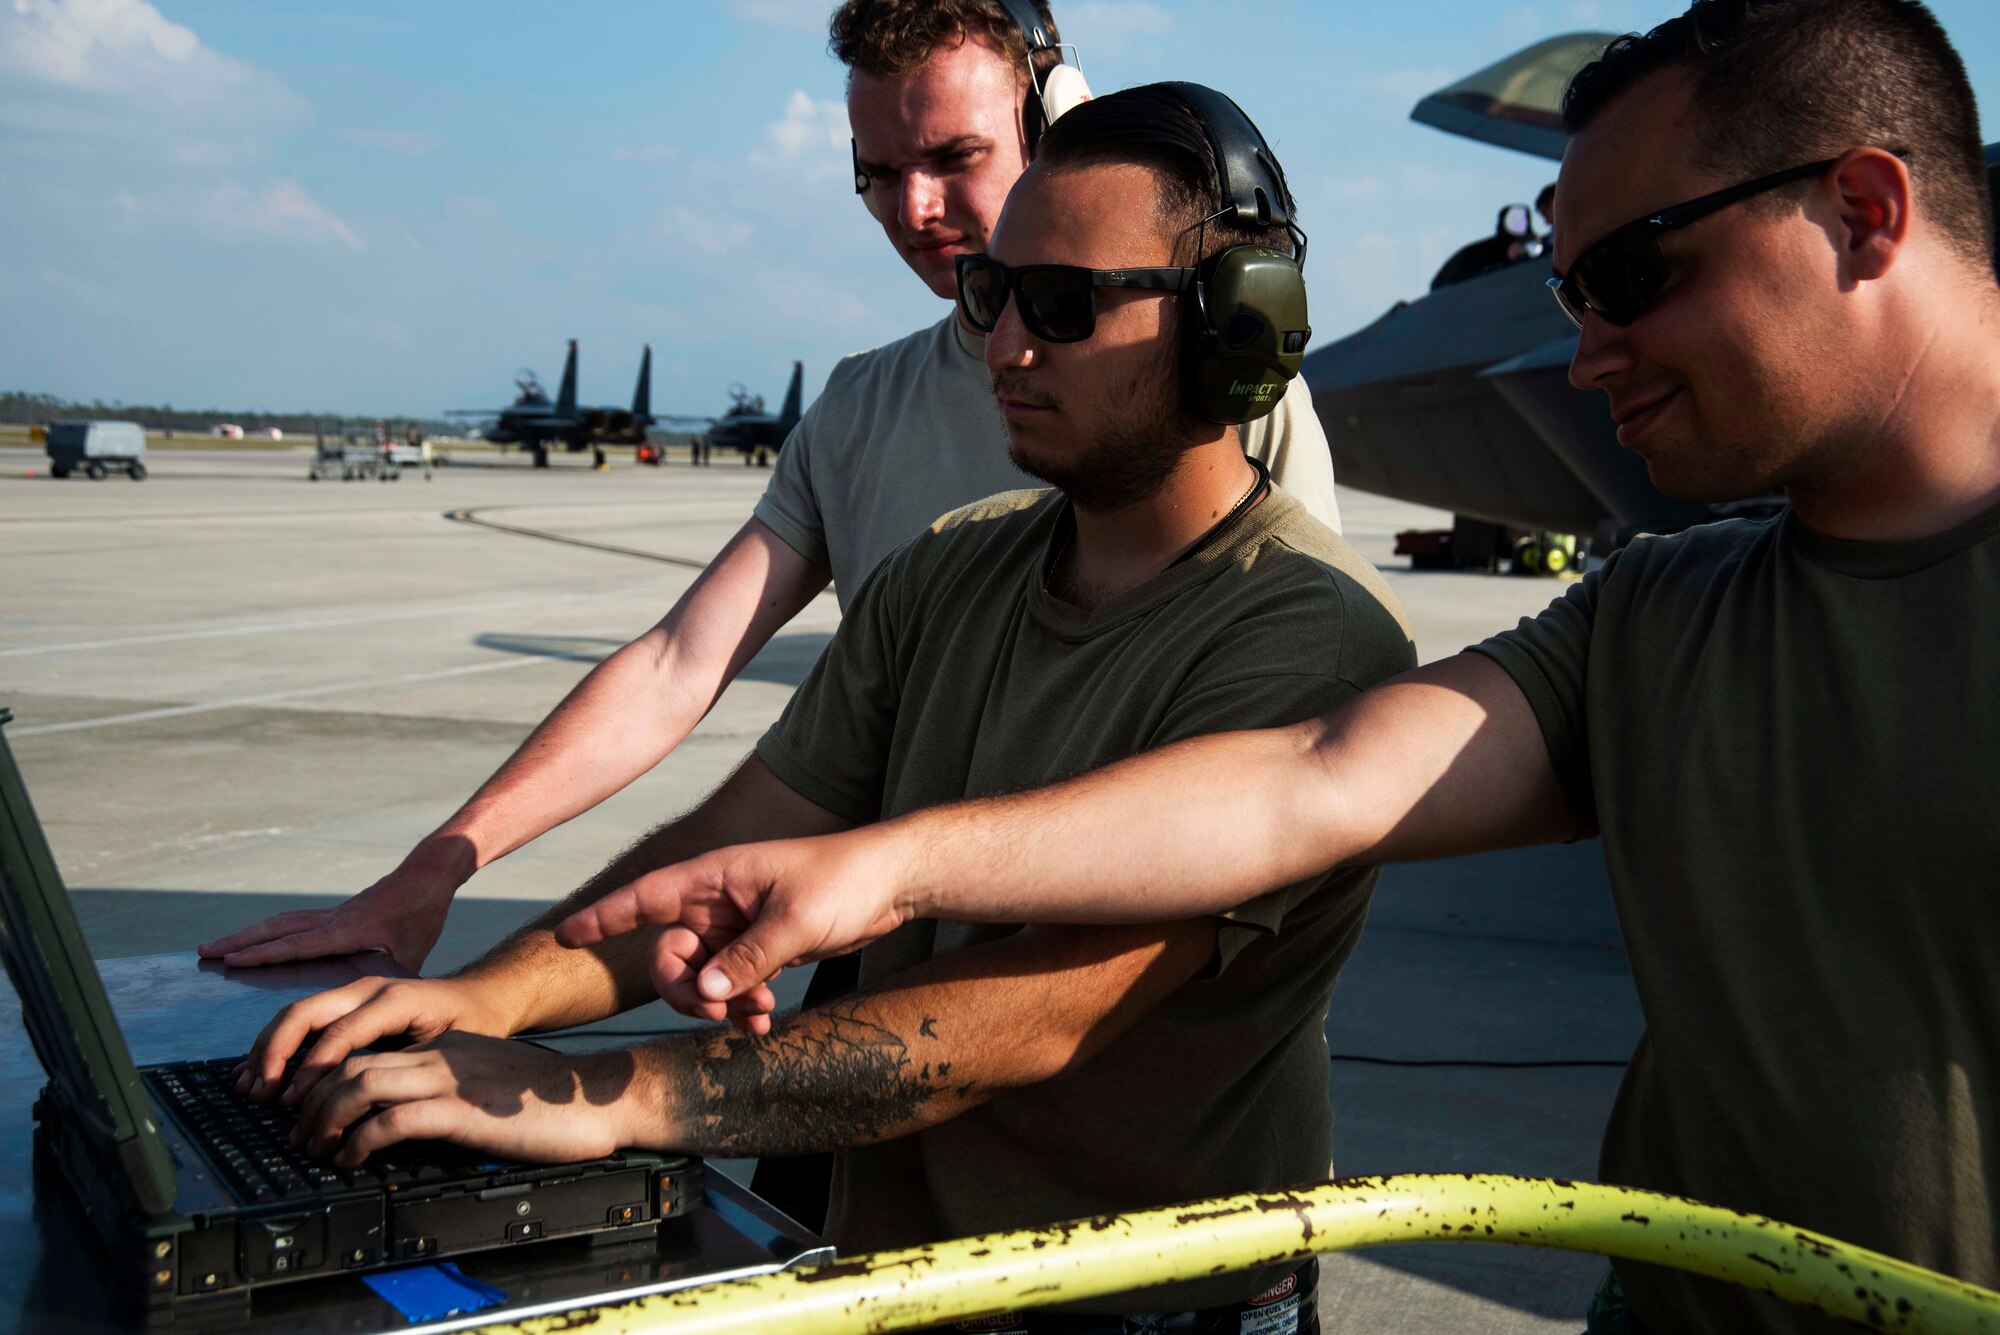 Maintenance Airmen support pre-flight aircraft operations on the flight line Nov. 6, 2019, at Tyndall Air Force Base, Florida. Tyndall supported Checkered Flag 20-1, which is a large-scale aerial exercise designed to integrate fourth and fifth-generation airframes to enhance mobility, deployment, and employment capabilities of aviators and maintainers. The exercise involved airpower assets, more than 50 aircraft, and support personnel from multiple installations. Aircraft and pilots participated in a Weapons System Evaluation Program and are evaluated on air-to-air and air-to-ground operations, providing a unique training environment. (U.S. Air Force photo by Staff Sgt. Magen M. Reeves)